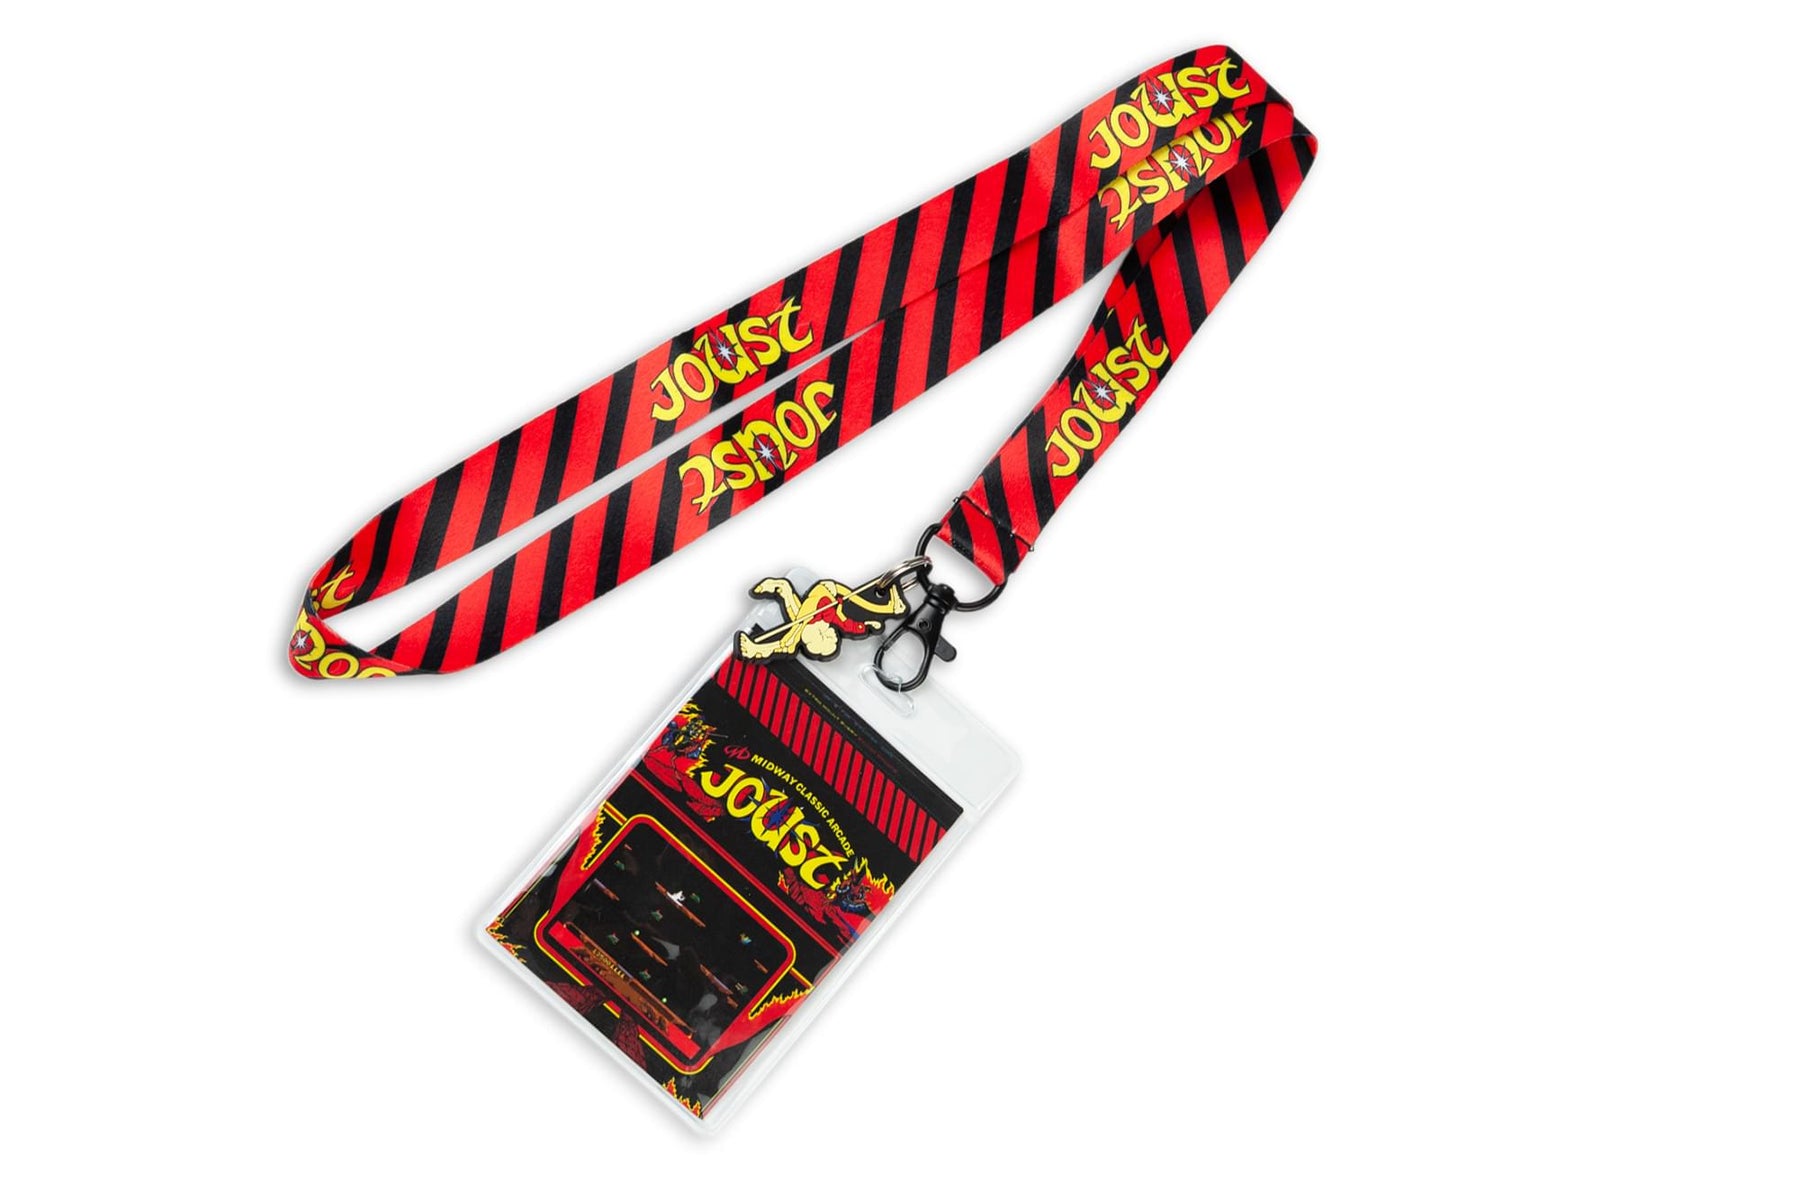 Midway Arcade Games Lanyard w/ ID Holder & Charm - Joust